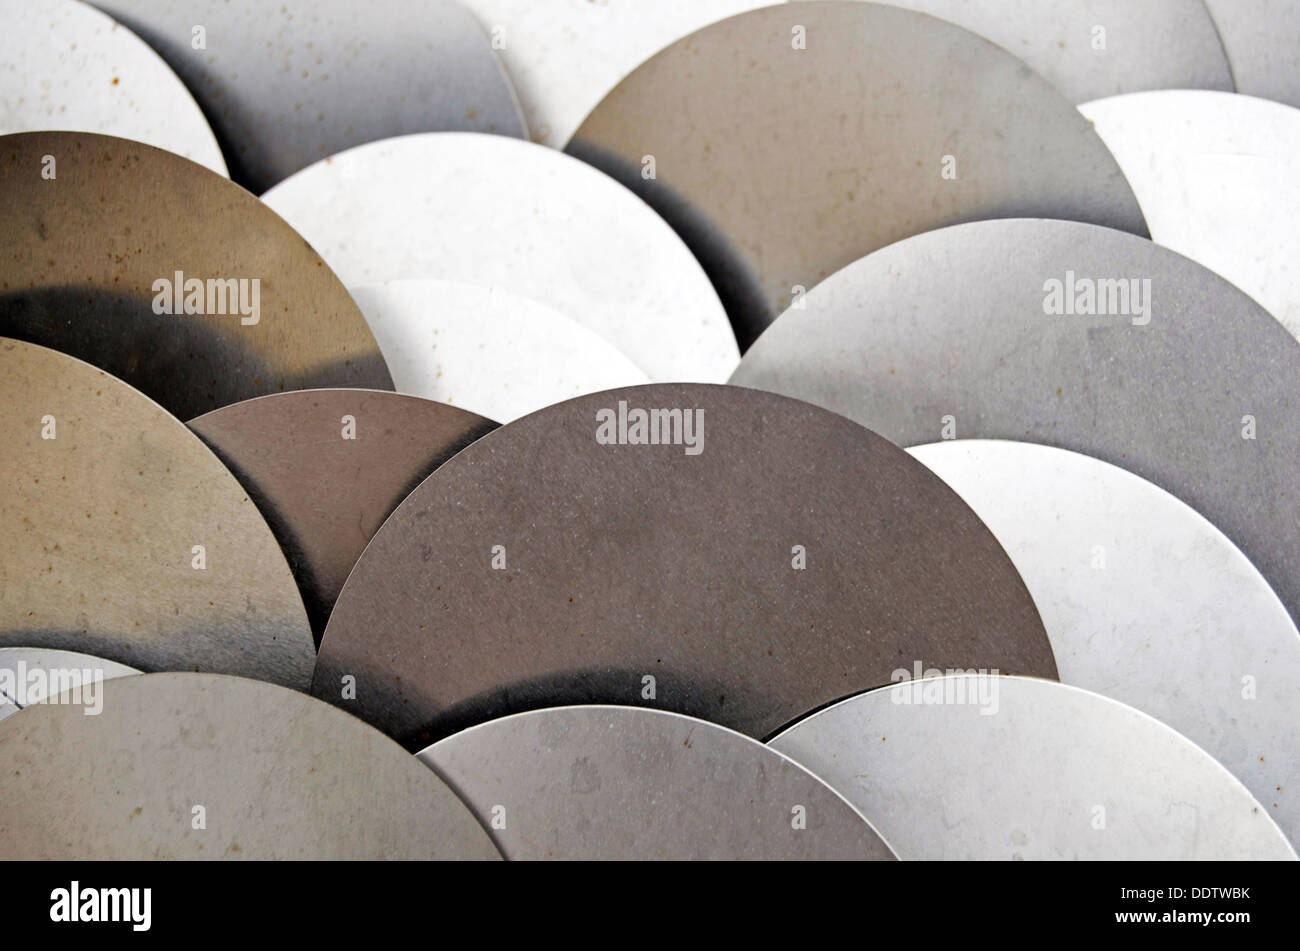 Silver disks stacked and reflecting different light. Stock Photo